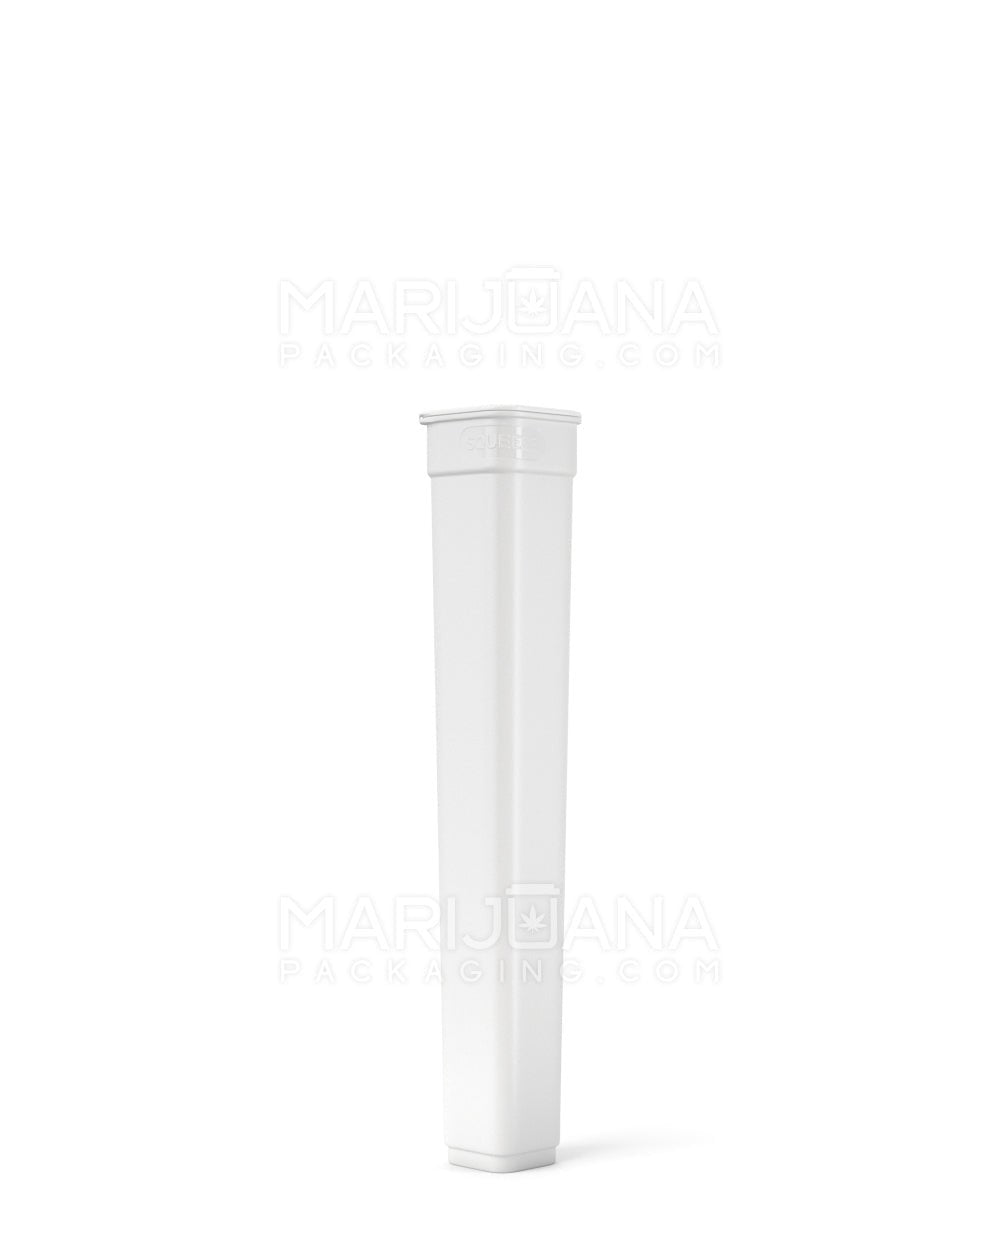 POLLEN GEAR | 100% Recyclable Opaque Pop Box Pop Top Plastic Pre-Roll Tubes | 119mm - White - 1840 Count - 2